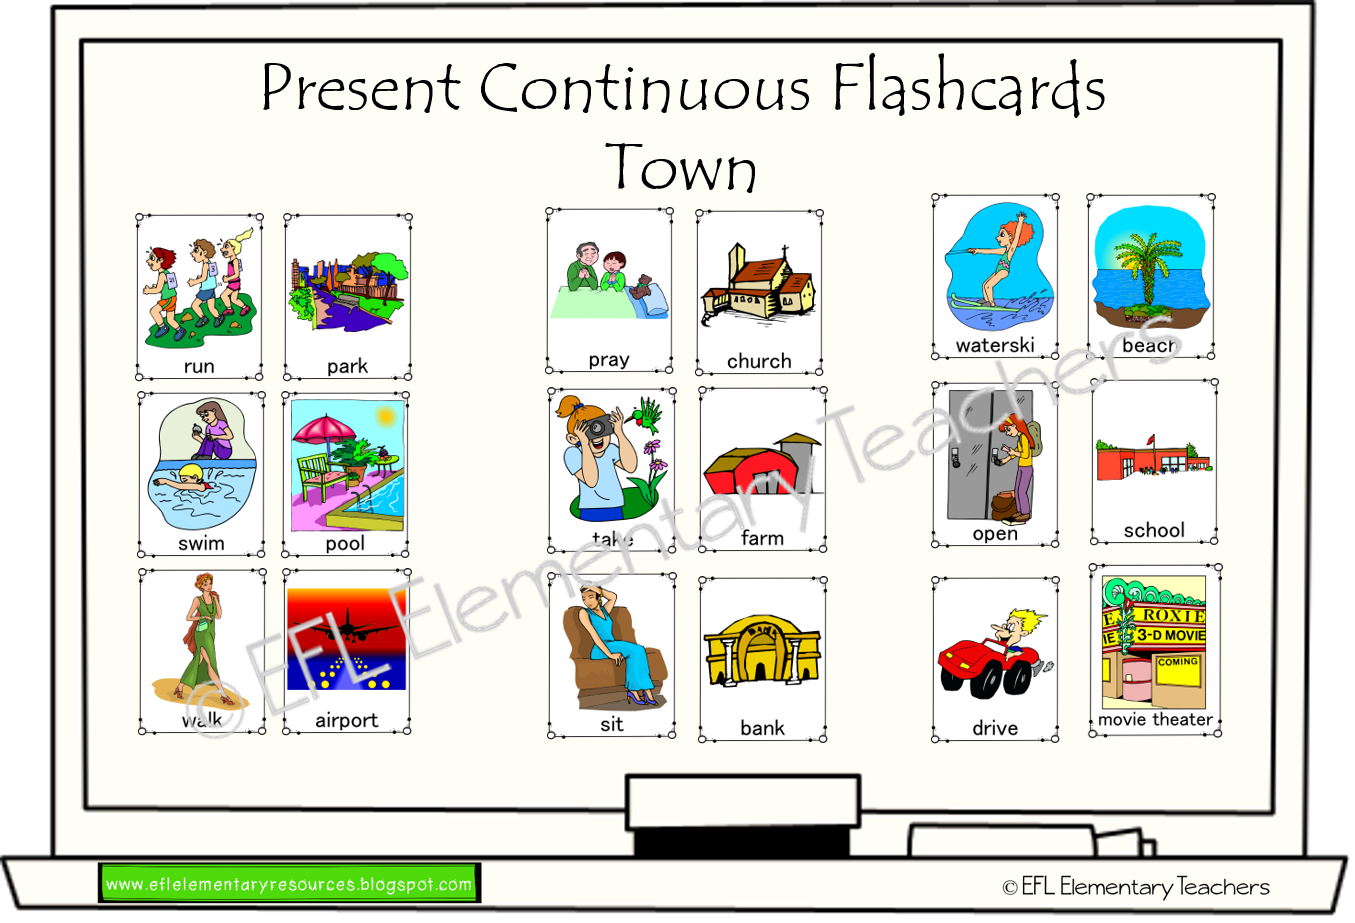 Present continuous weather. Present Continuous Flashcards. Презент континиус Flashcards. Present Continuous картинки для описания. Present Continuous Flashcards for Kids.